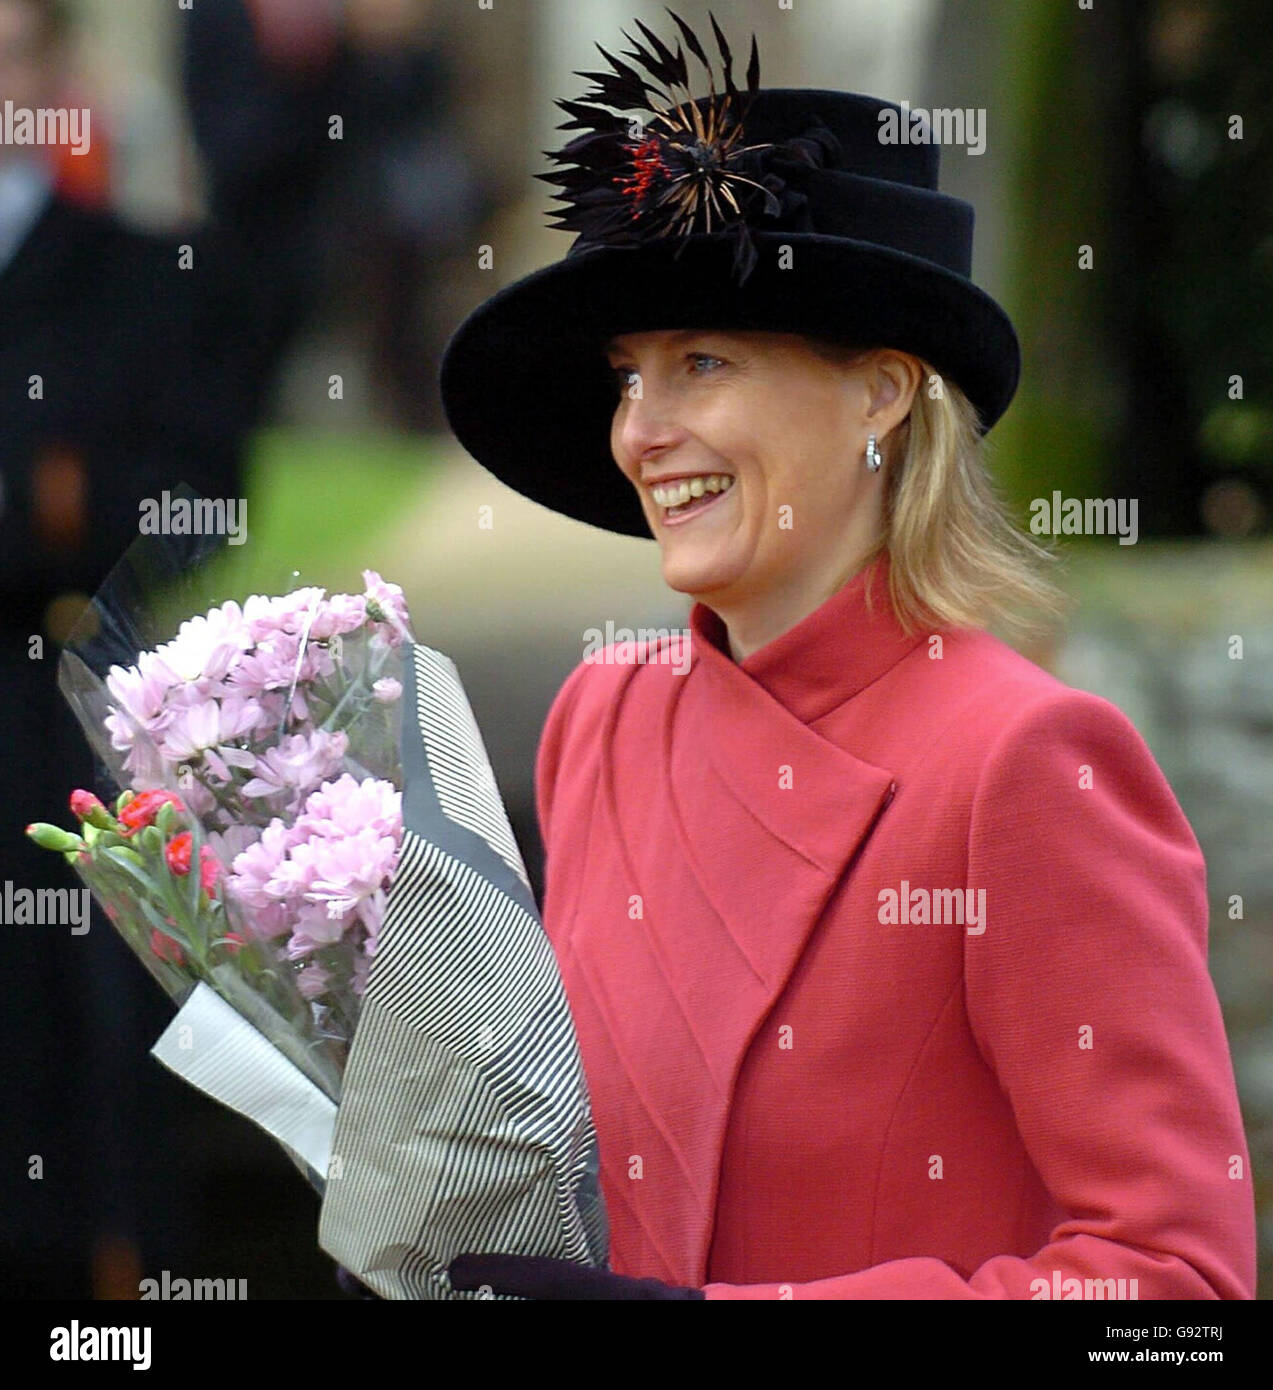 The Countess of Wessex after the Christmas day service at St Mary Magdalene Church on the Sandringham Estate in Norfolk, Sunday December 25, 2005. See PA story ROYAL Church. PRESS ASSOCIATION Photo. Photo credit should read: Chris Radburn/WPA rota/PA Stock Photo